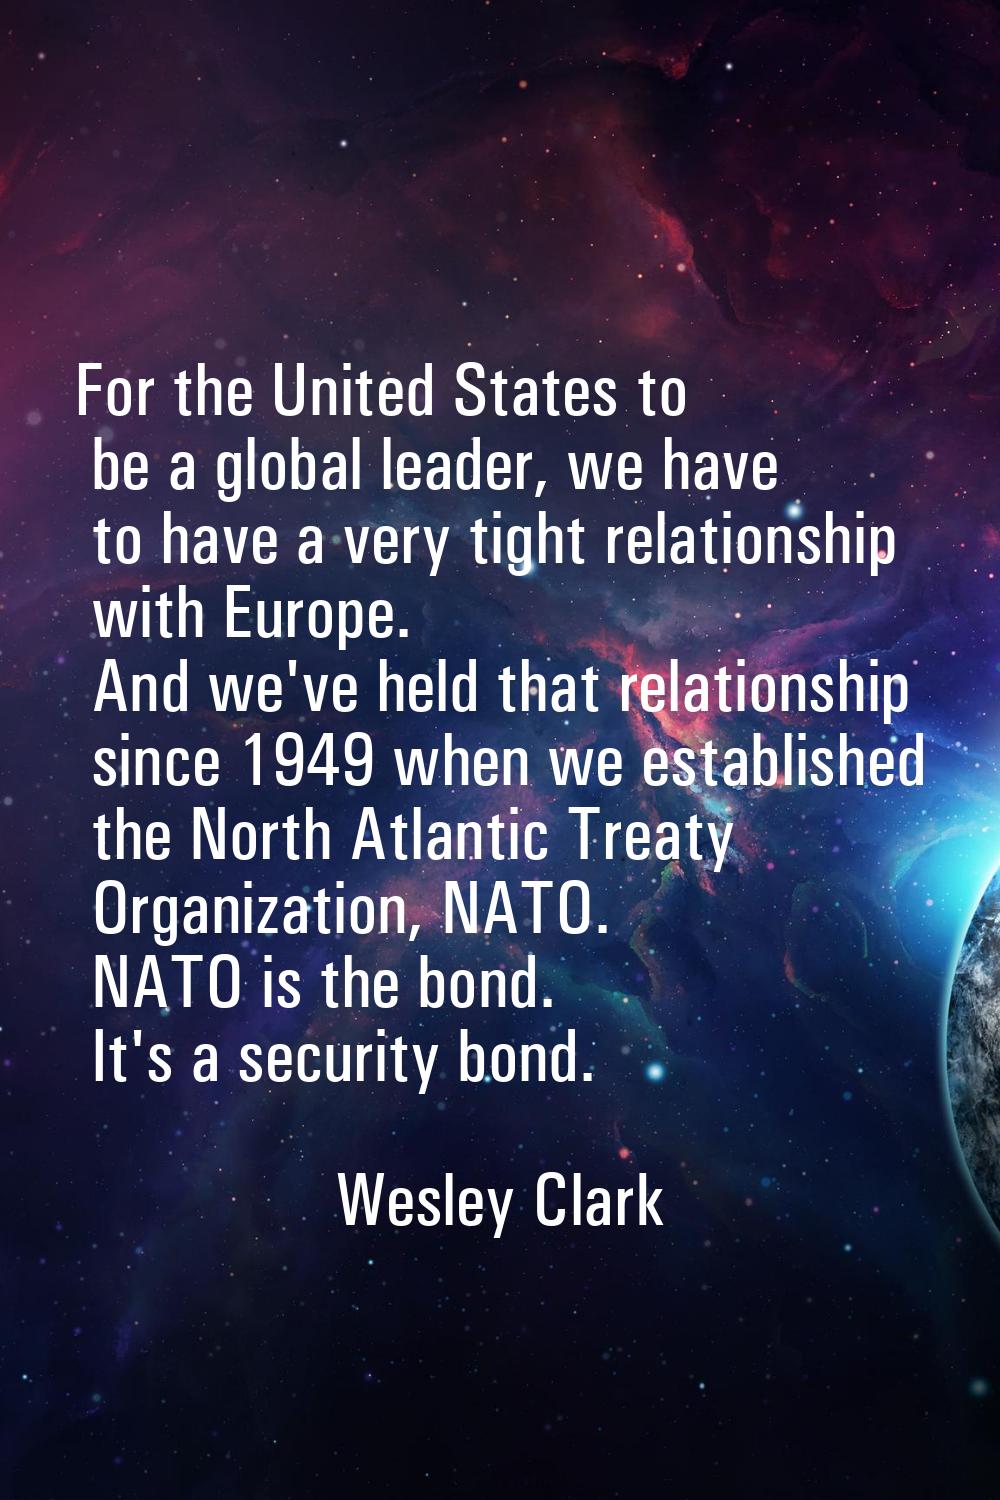 For the United States to be a global leader, we have to have a very tight relationship with Europe.